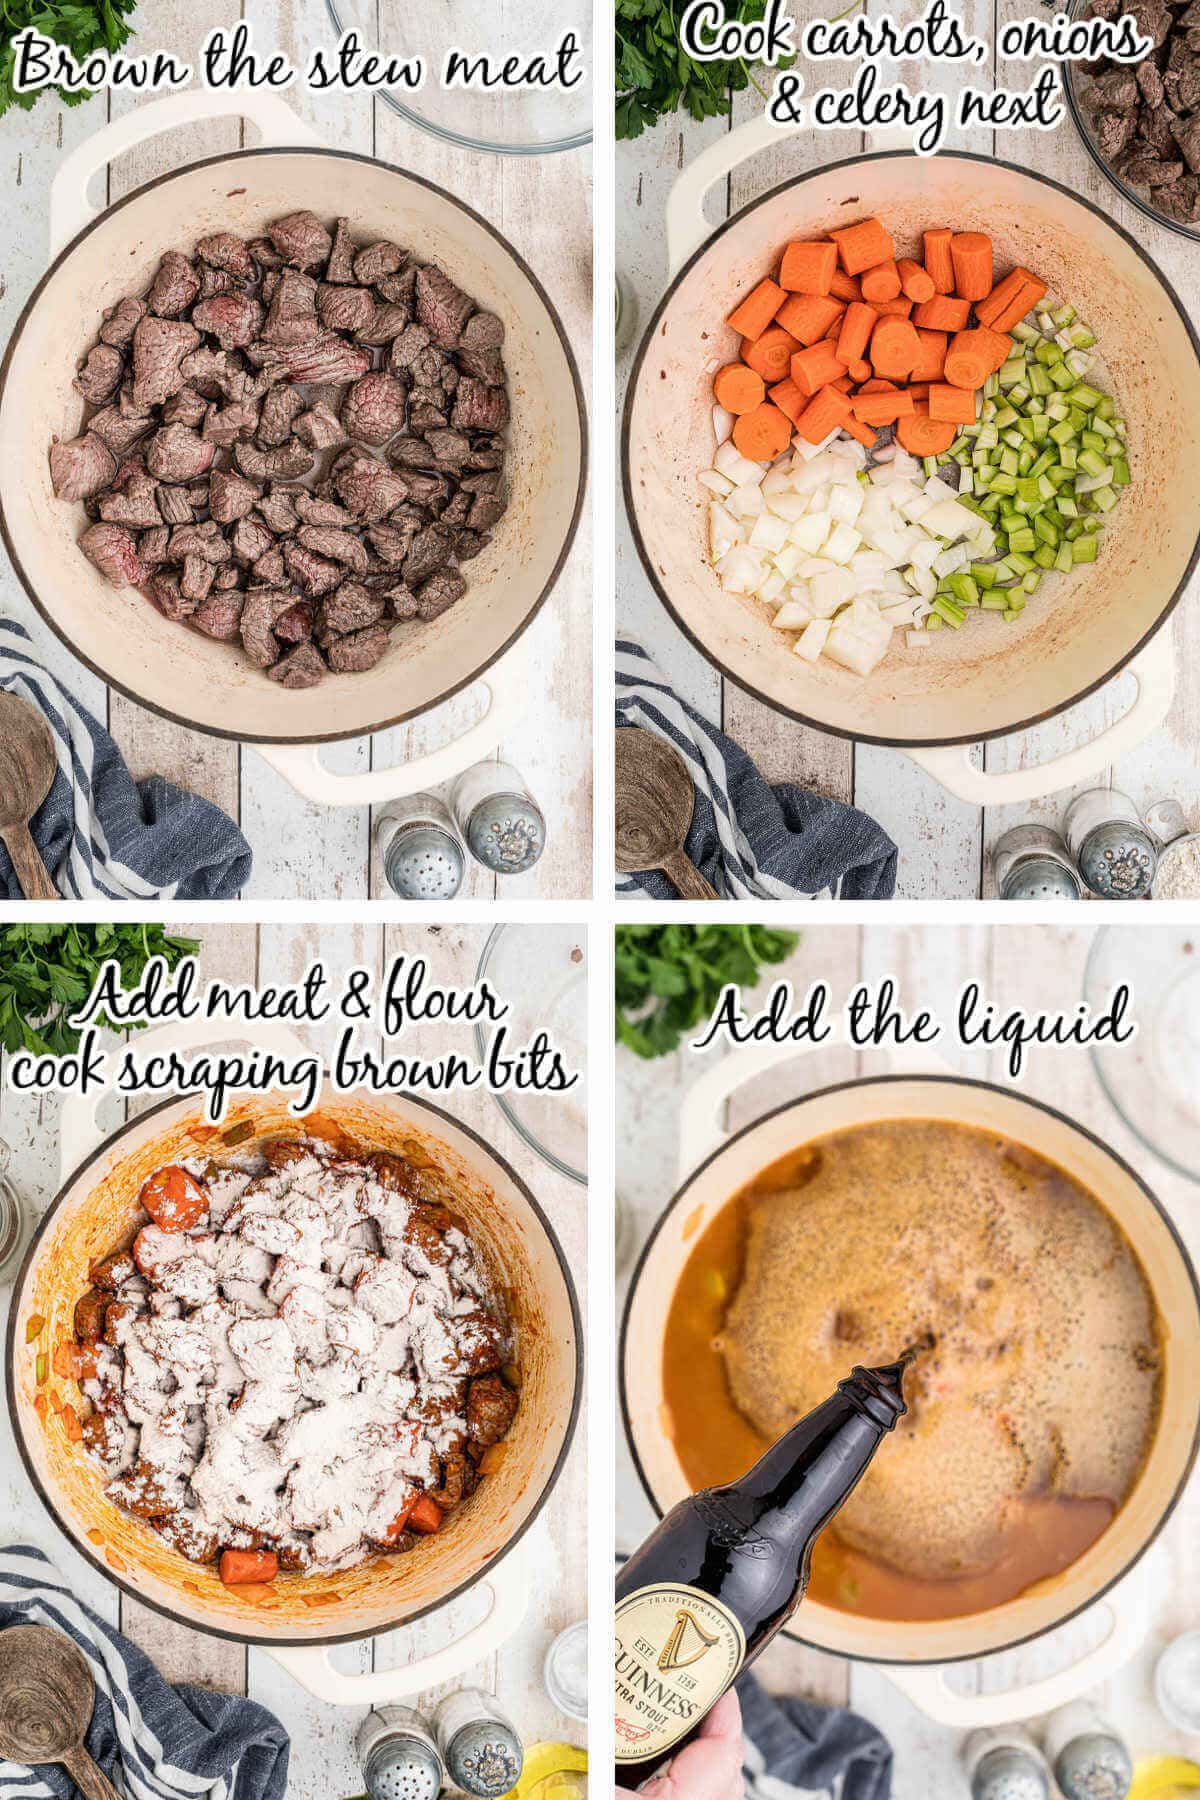 Photos showing step by step instructions to make soup recipe. With print overlay  